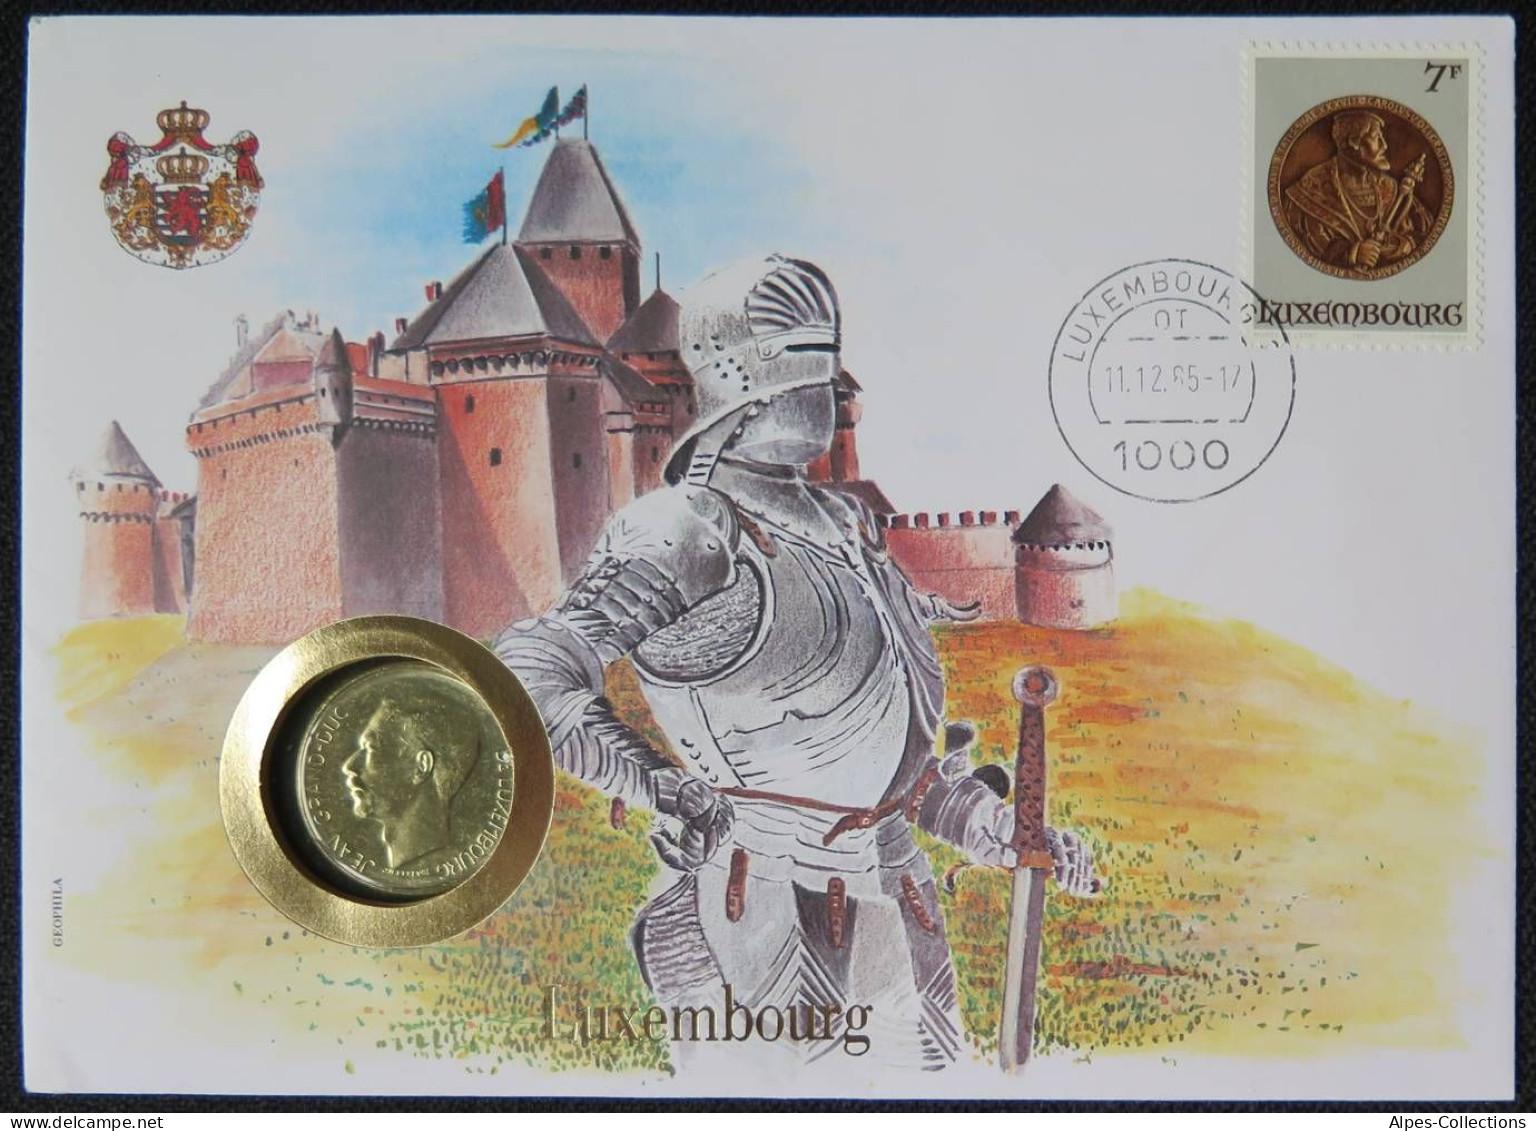 LUX57 - LUXEMBOURG - Numiscover  - 10 FRANCS 1980 - Luxembourg